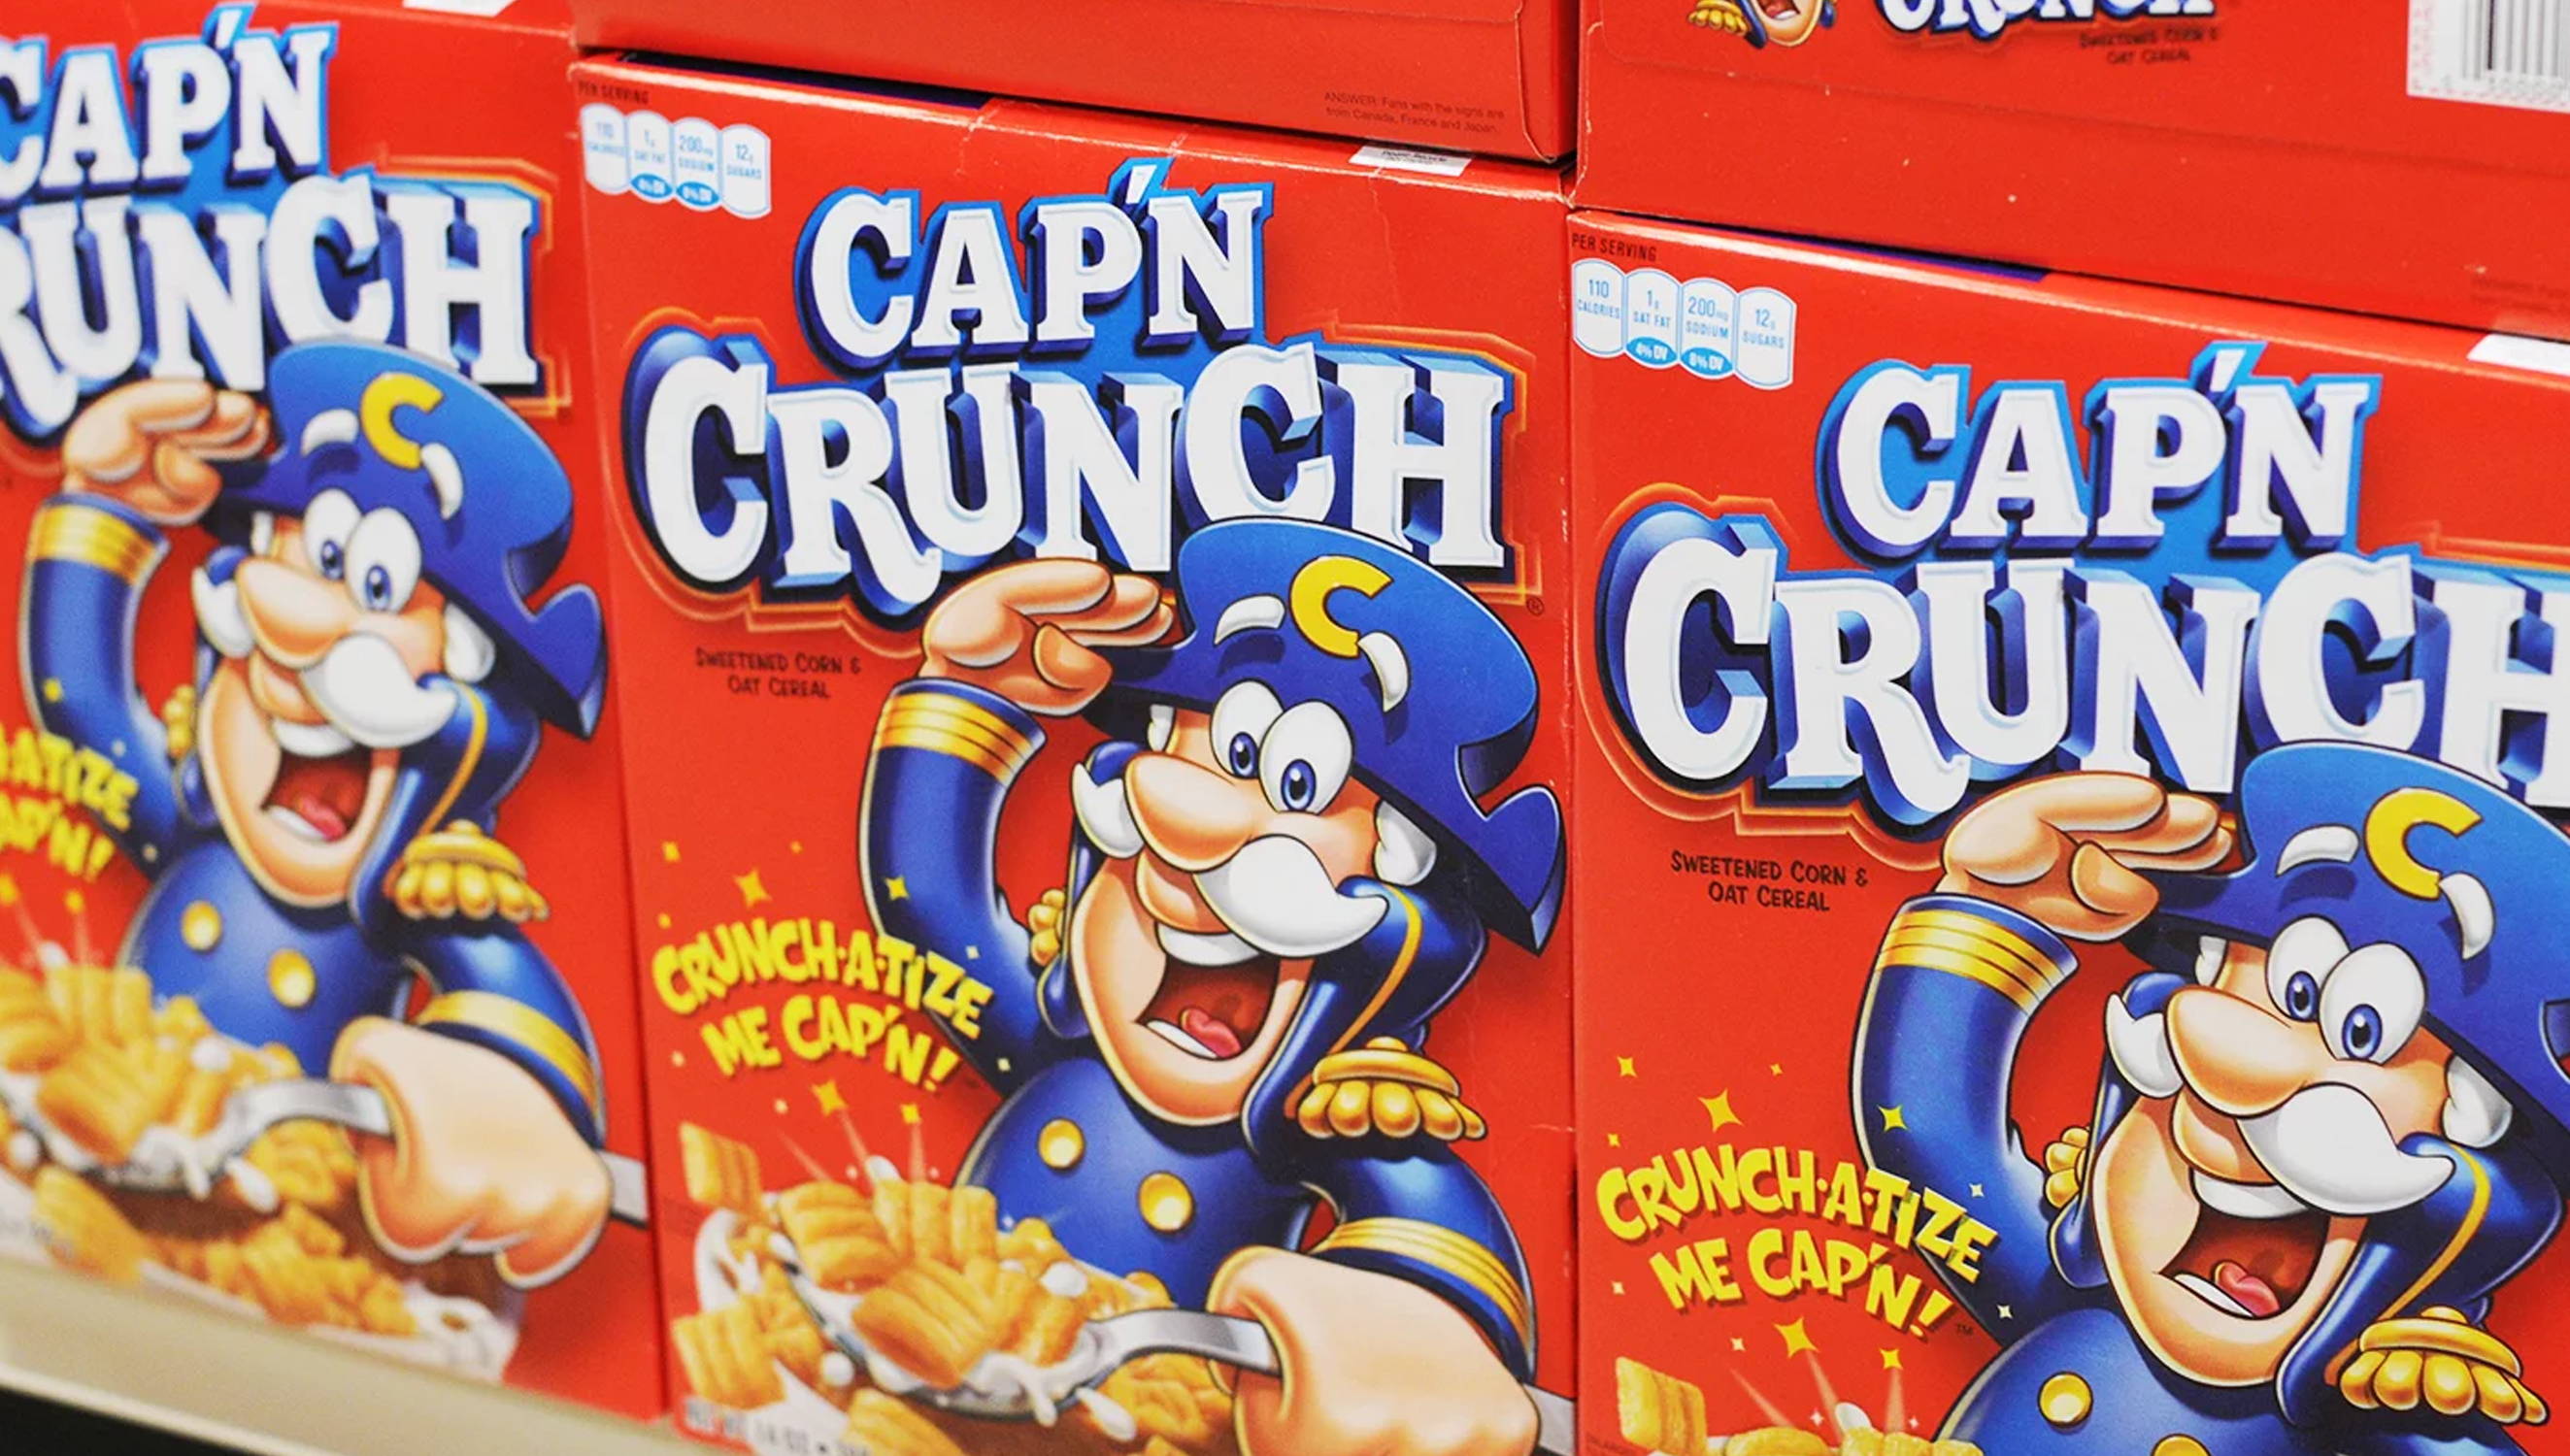 Boxes of Cap'n Crunch cereal